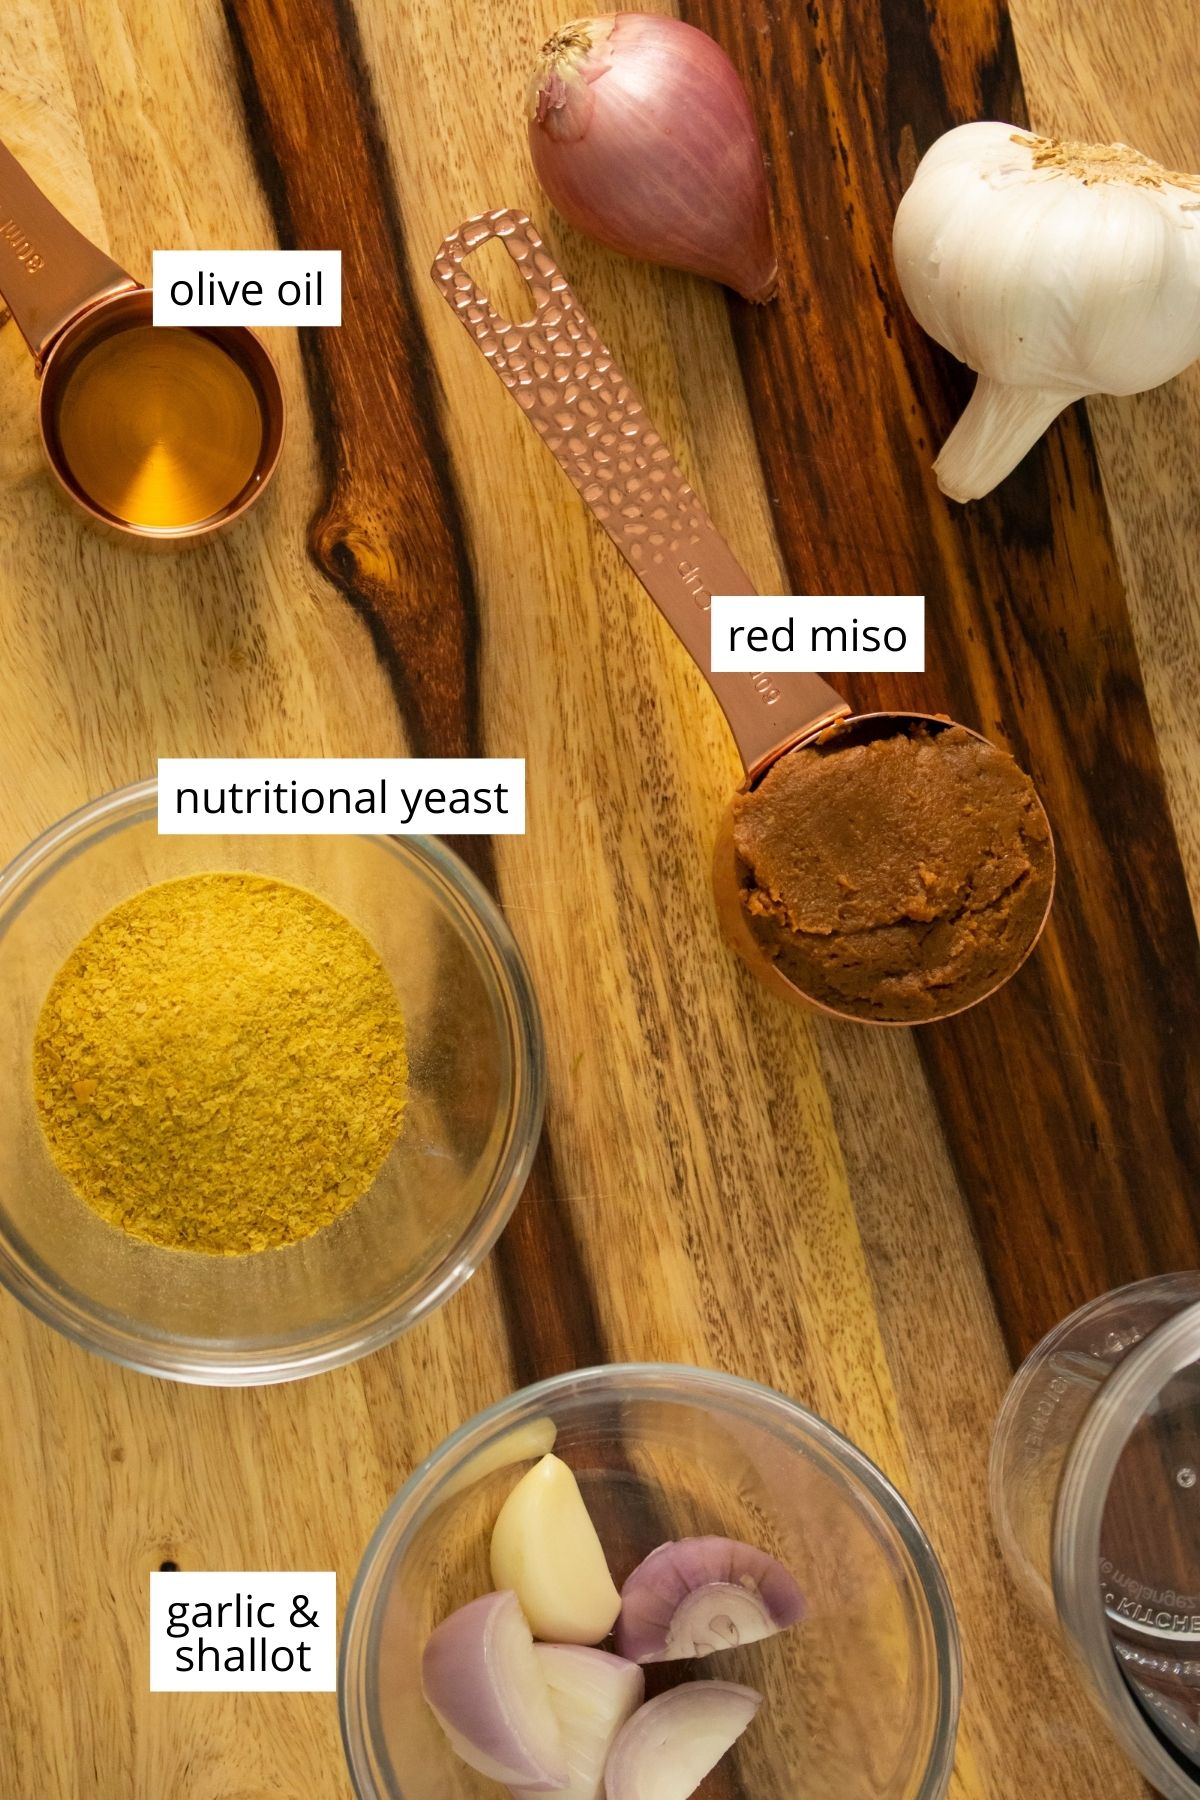 cups of miso, nutritional yeast, garlic, and shallots with text labels on each ingredient